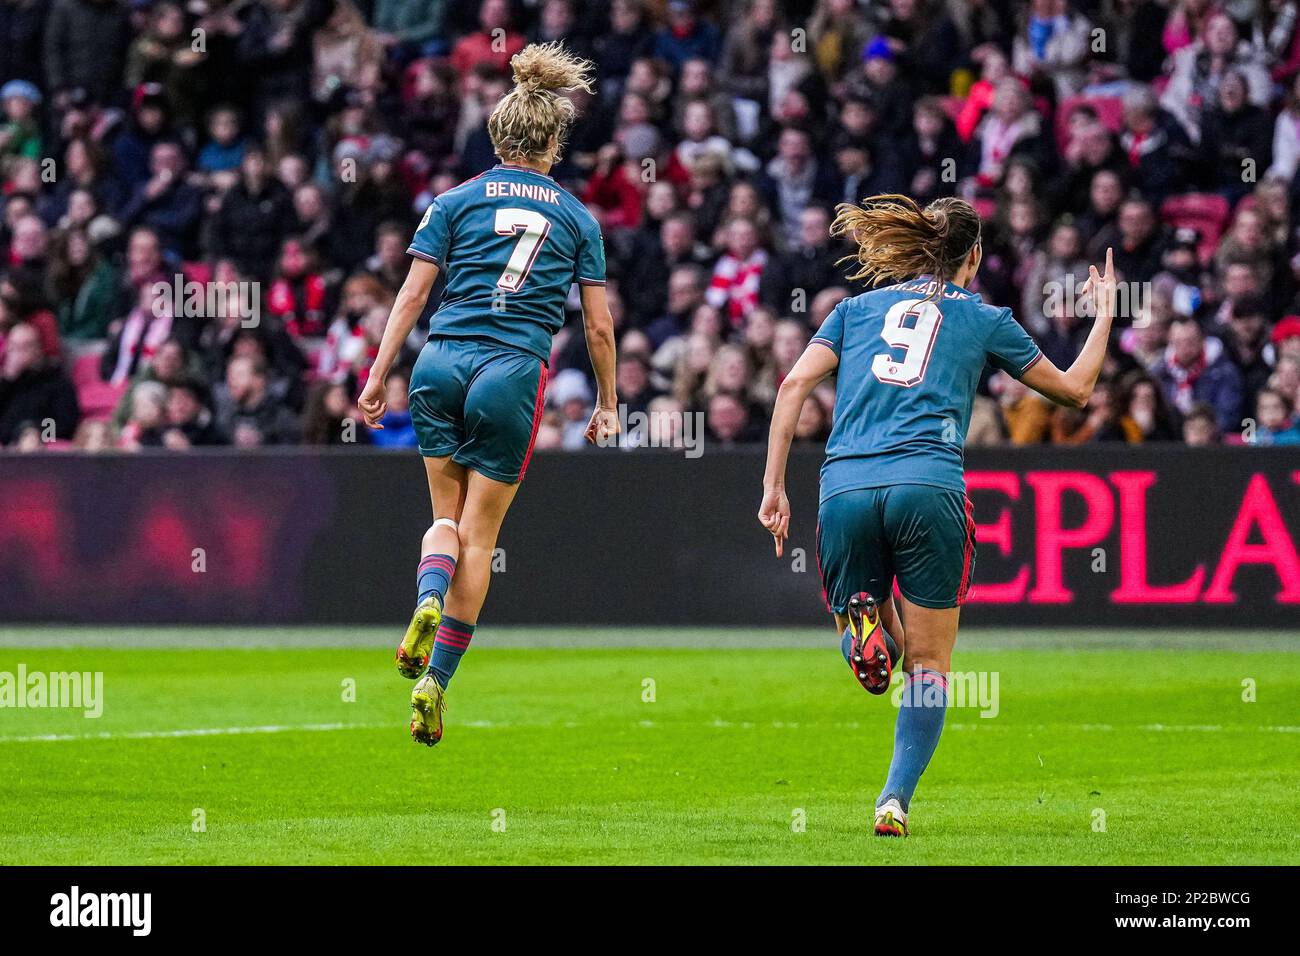 Amsterdam - Maxime Bennink of Feyenoord V1 celebrates the 0-1 during the match between Ajax V1 v Feyenoord V1 at Johan Cruyff Arena on 4 March 2023 in Amsterdam, Netherlands. (Box to Box Pictures/Yannick Verhoeven) Stock Photo